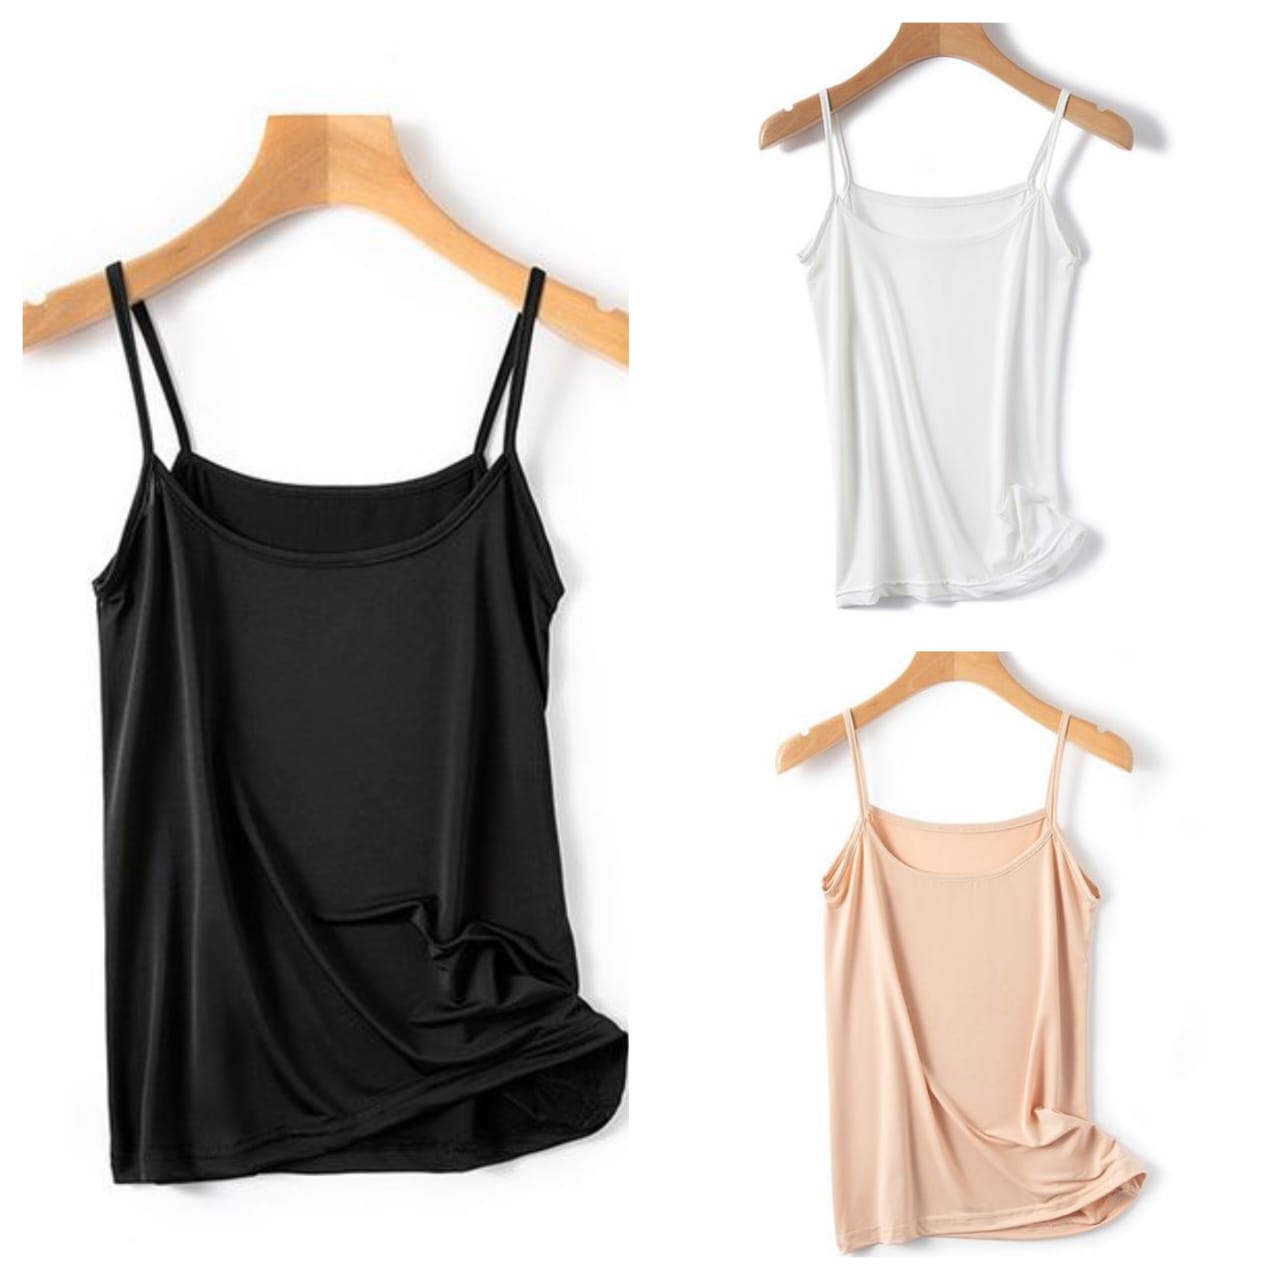 Pack of 3 soft cotton Women camisoles (SD-SH-00017)